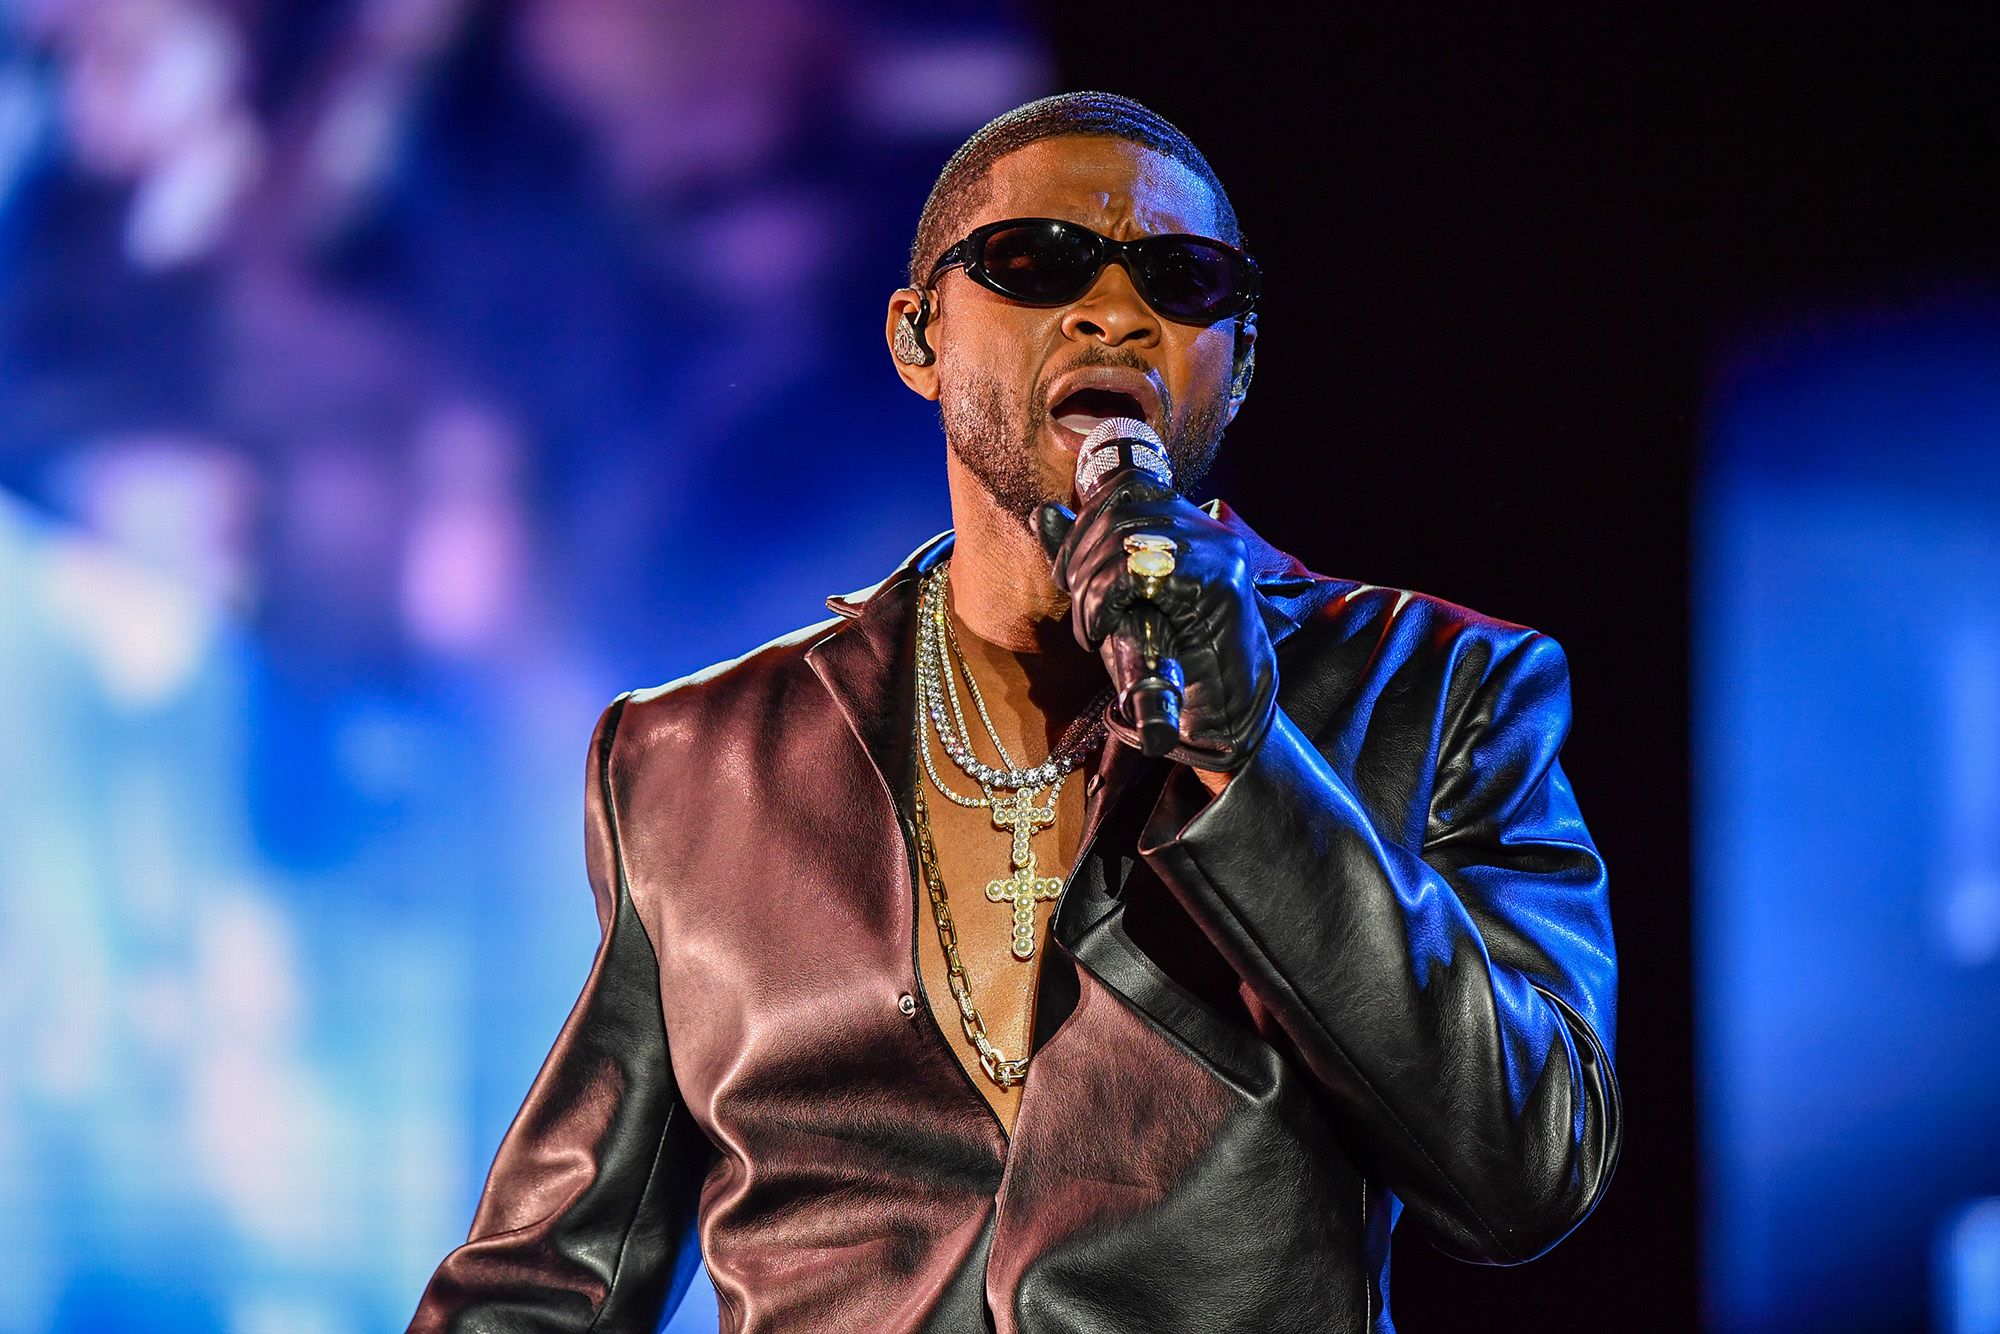 Usher wearing a leather black jacket while holding a mic